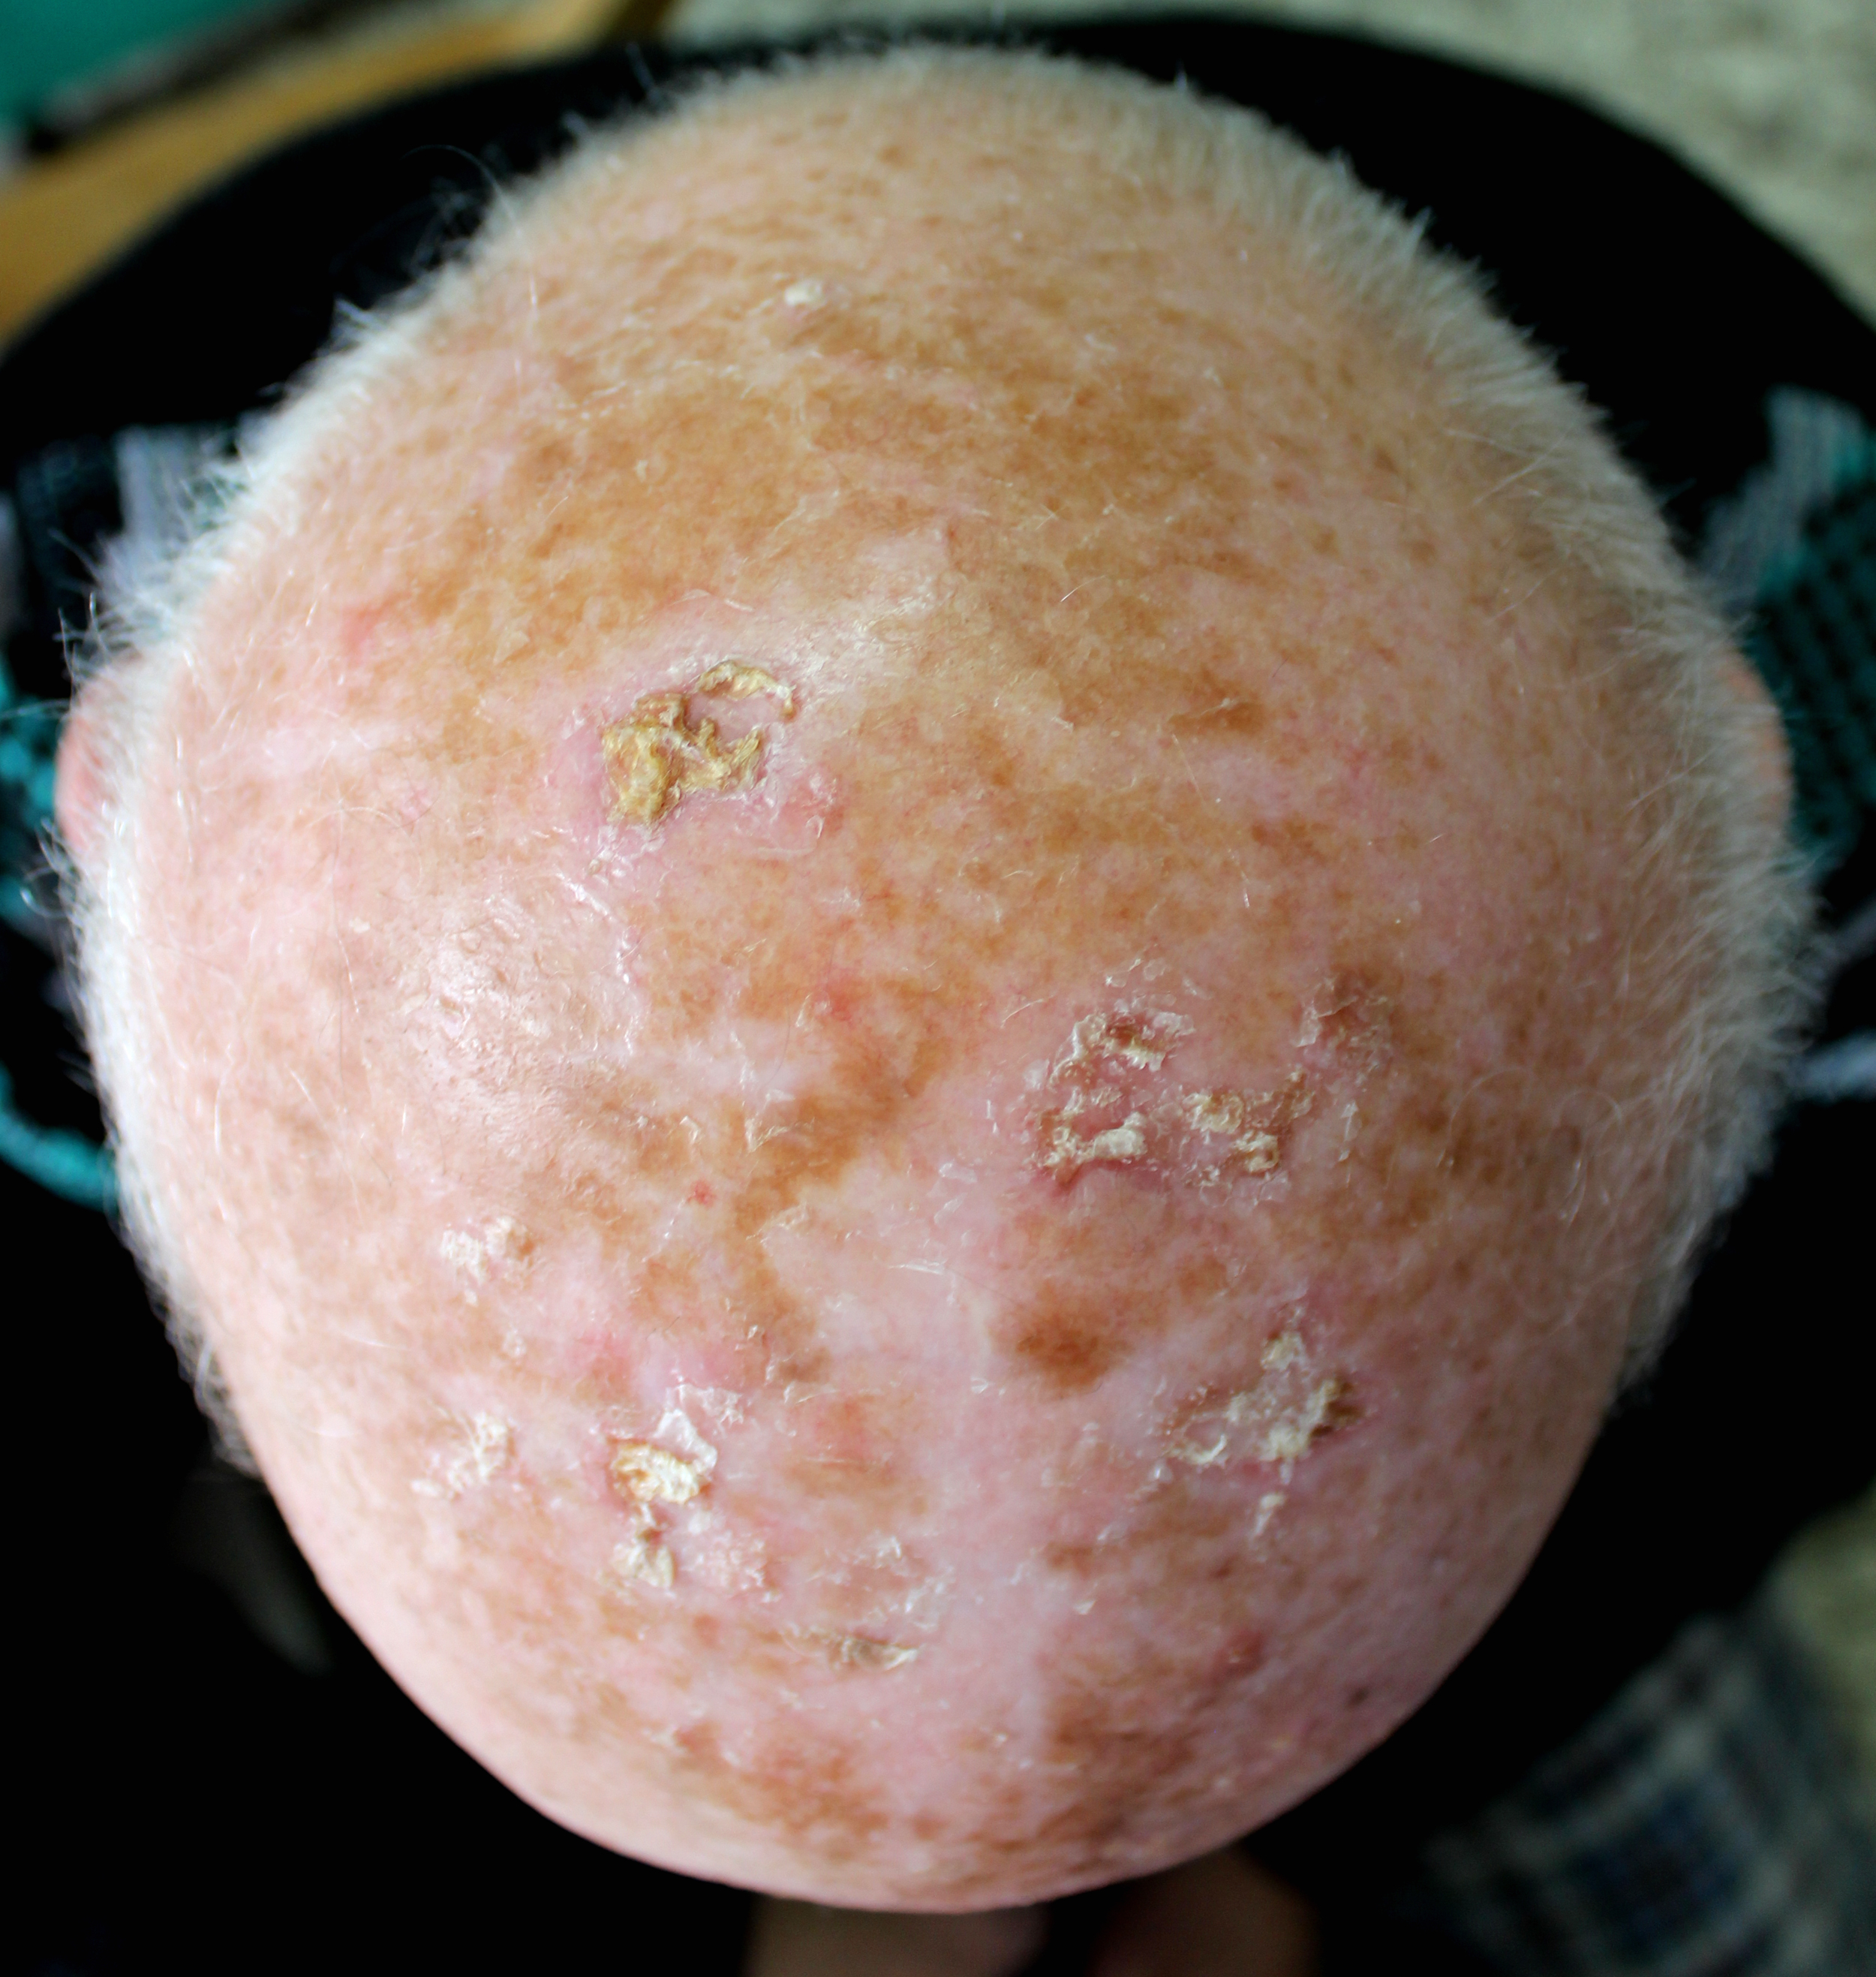 Can Scabs on Your Scalp Be Cancer?